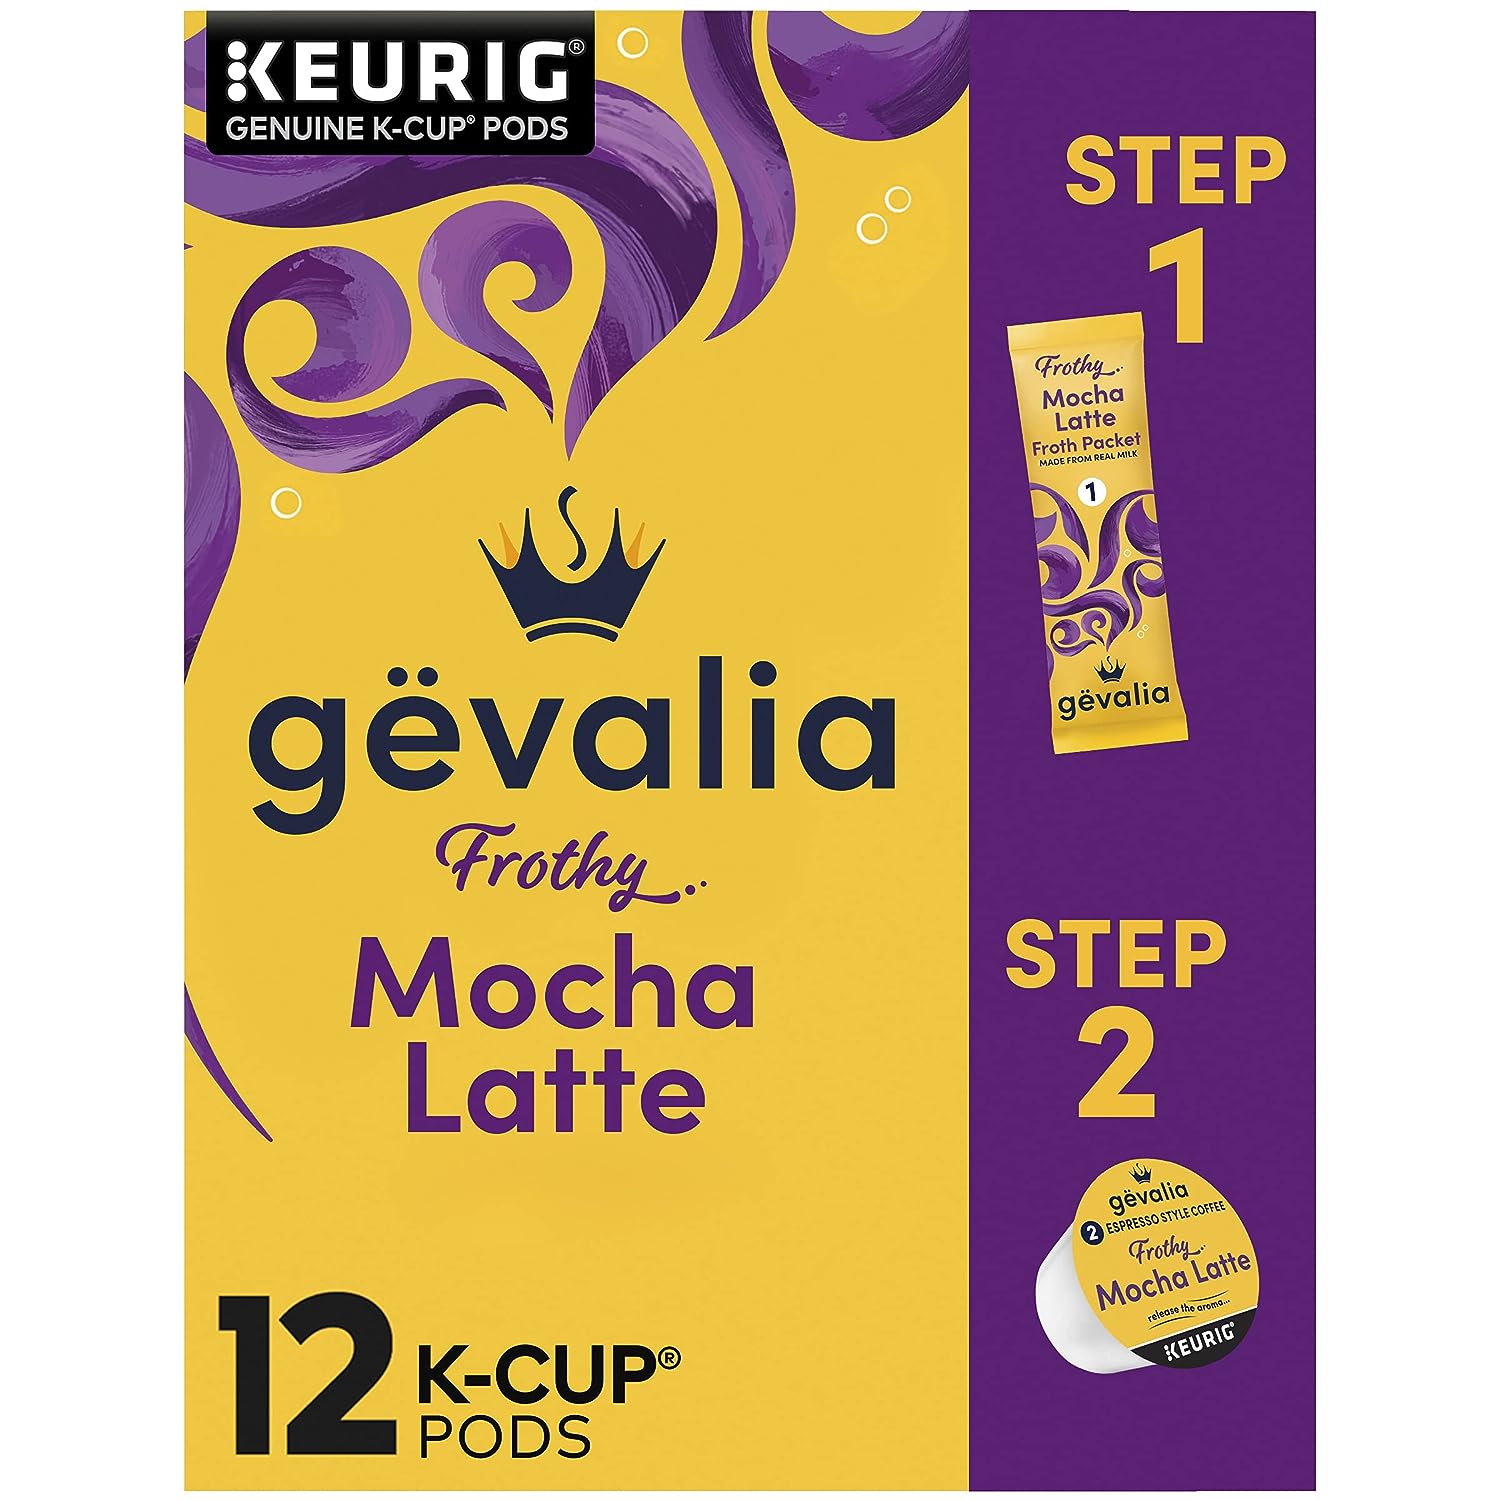 Gevalia Frothy 2-Step Mocha Latte Expresso K-Cup® Coffee Pods & Froth Packets Kit (12 ct Box)